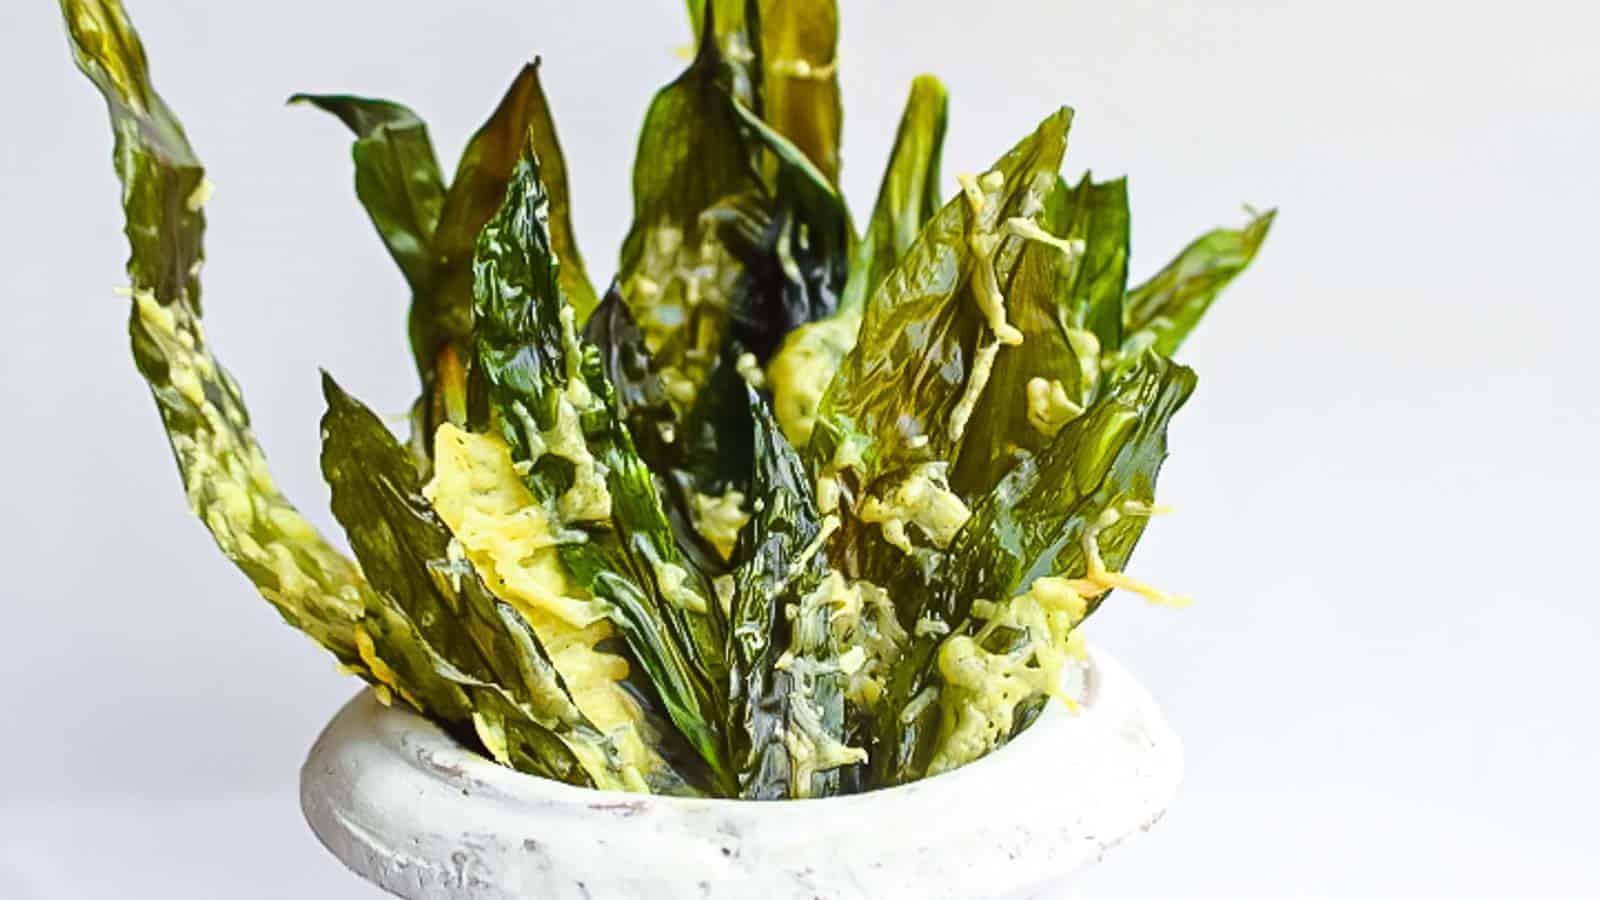 <p>Enter the world of leafy greens with these wild garlic greens chips. Low in carbs and big on crunch, these chips are a savory option to kickstart your January. With a mild garlic flavor and a pleasing texture, these greens chips offer a simple yet delicious way to incorporate more vegetables into your snacking routine.<br><strong>Get the Recipe: </strong><a href="https://www.lowcarb-nocarb.com/wild-garlic-chips/?utm_source=msn&utm_medium=page&utm_campaign=msn">Wild Garlic Greens Chips</a></p>